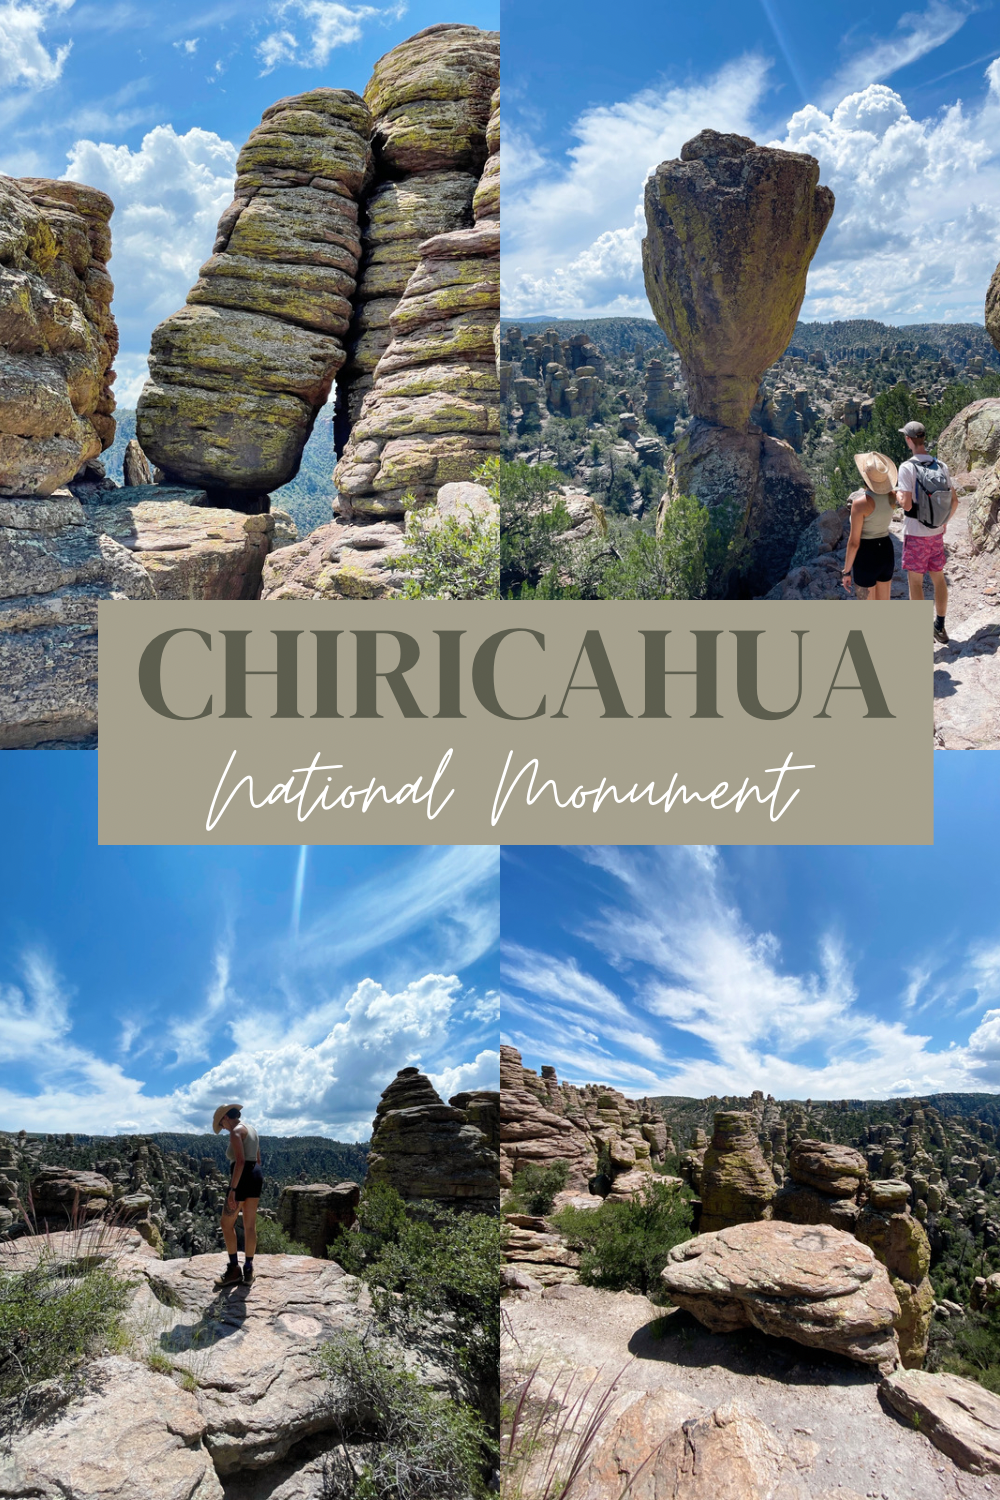 Chiricahua National Monument: A Beautiful Park That You Must Visit